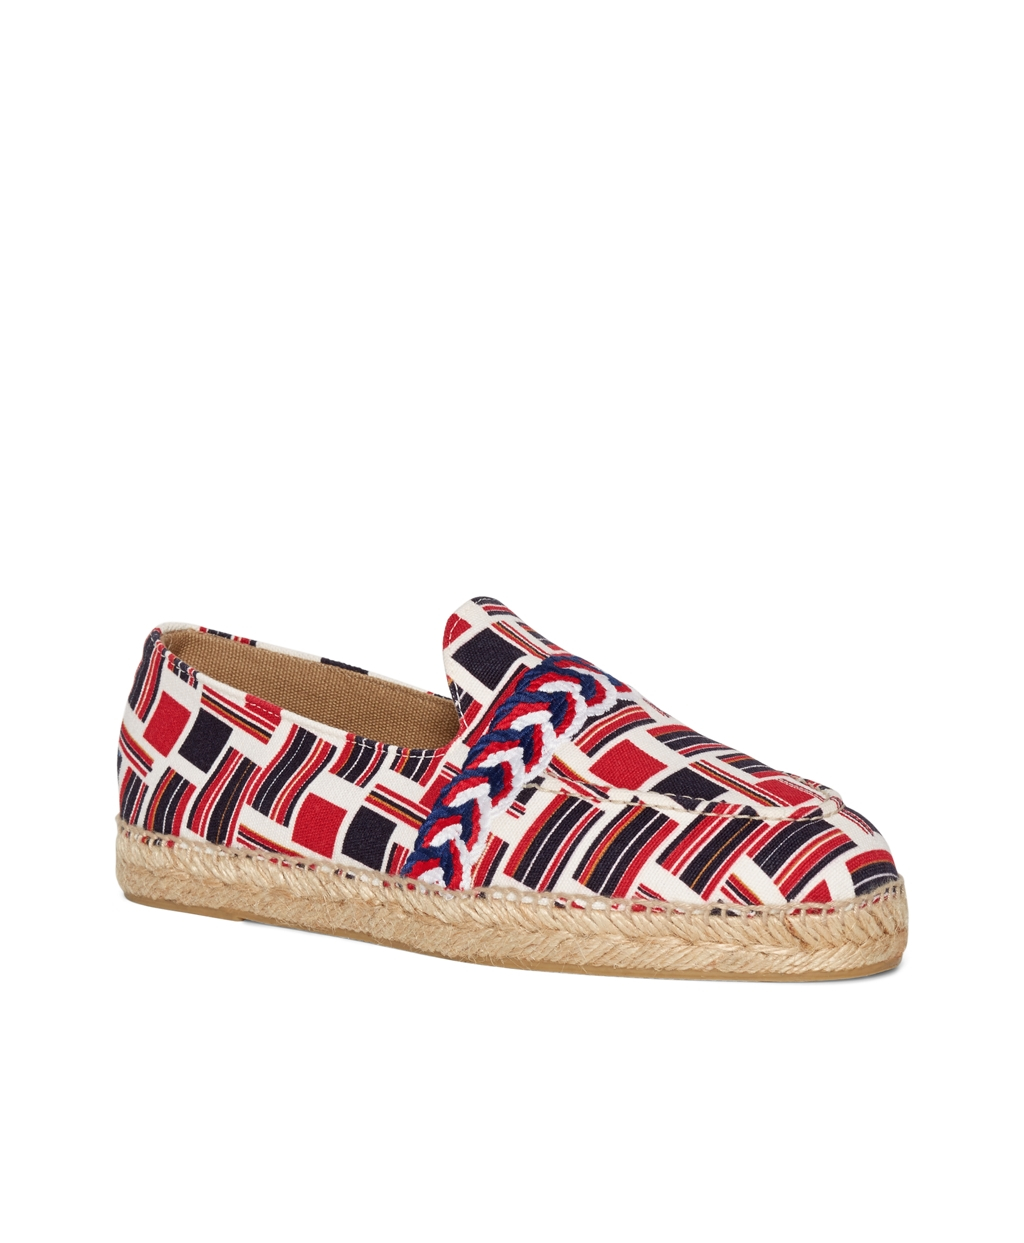 Lyst - Brooks brothers Flag Espadrille in Red